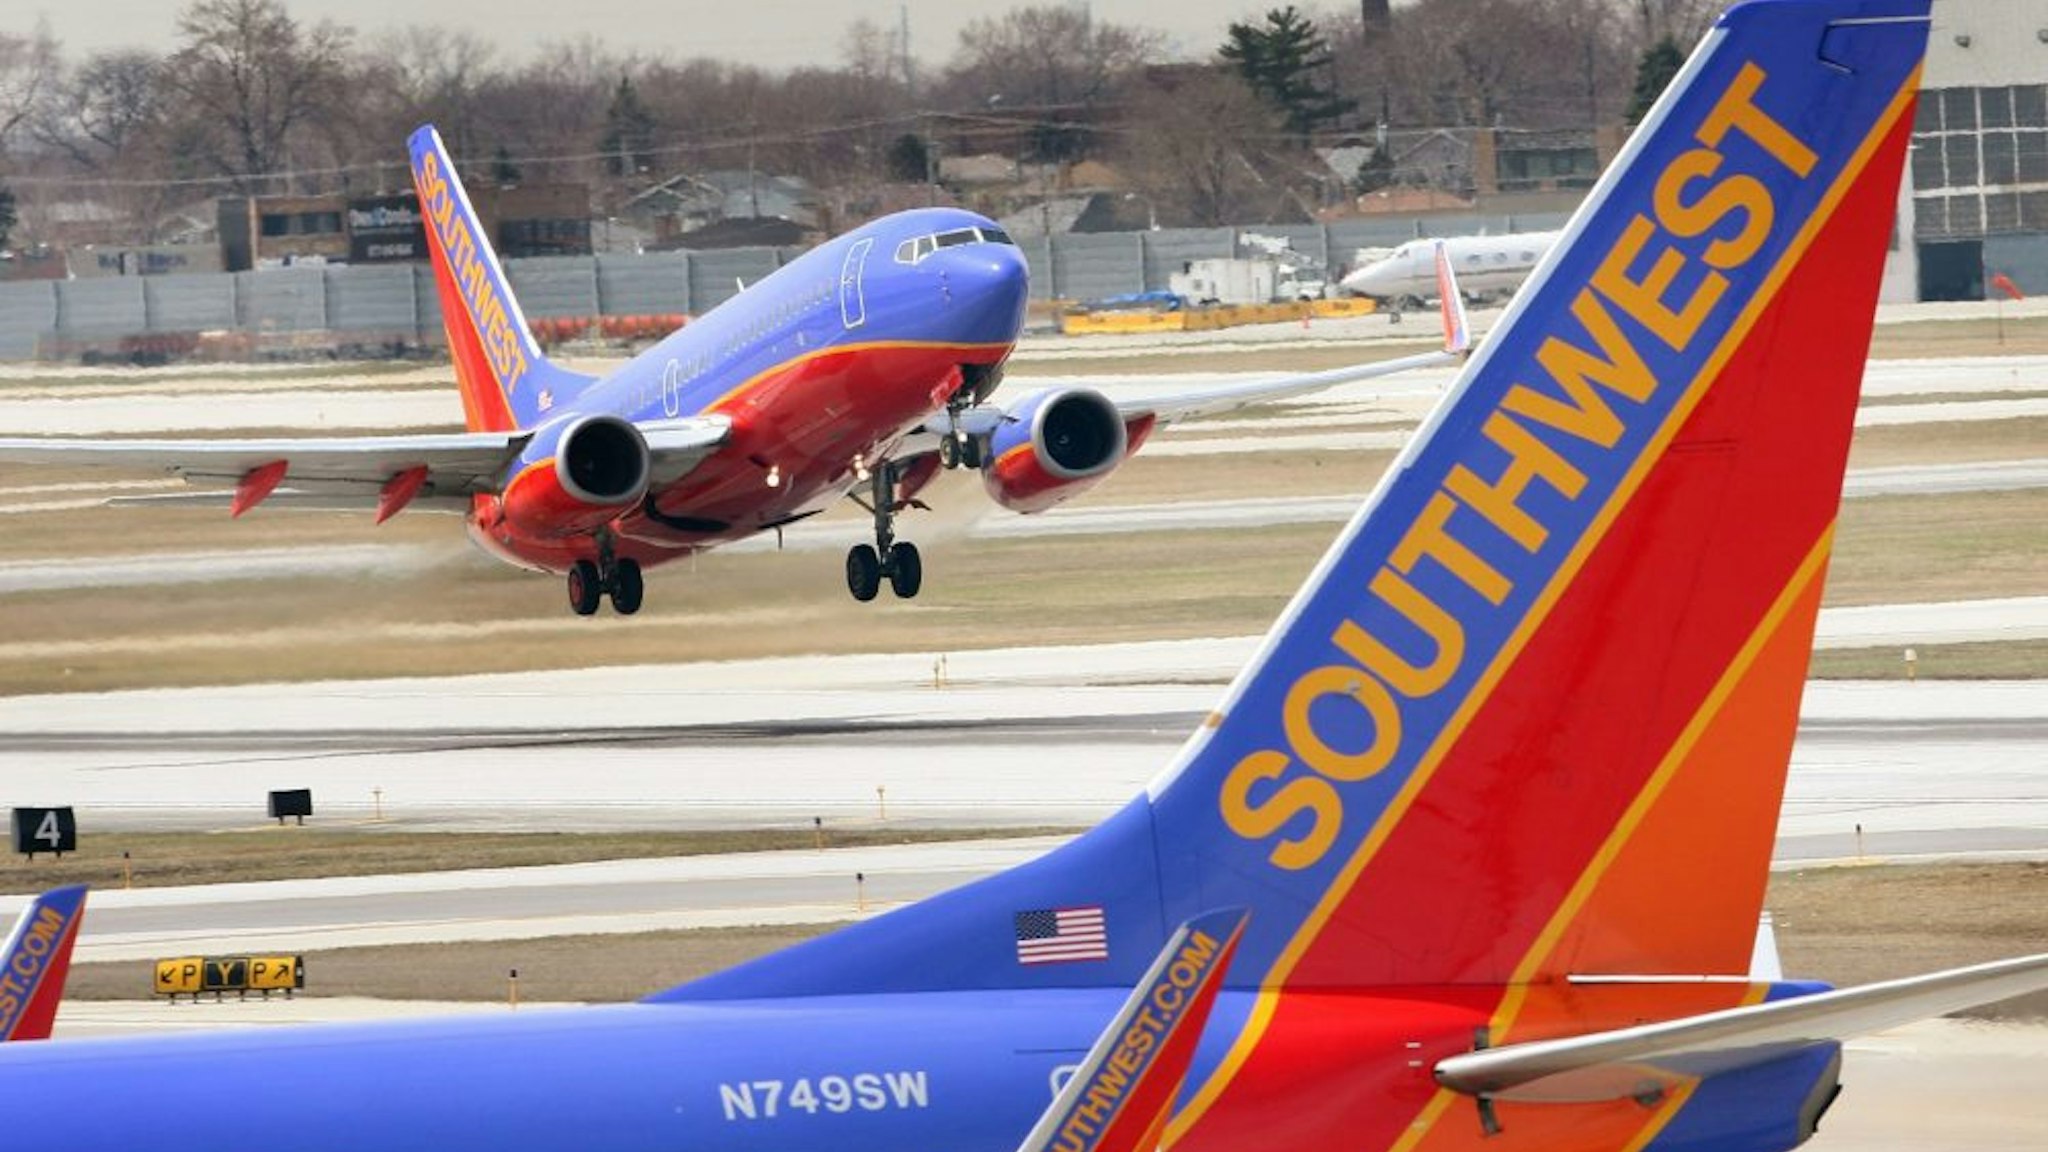 CHICAGO - APRIL 3: A Southwest Airlines jet takes off at Midway Airport April 3, 2008 in Chicago, Illinois. Officials from Southwest and other airlines will testify at a safety hearing on Capitol Hill today following recent cancellations of flights by Southwest, United, American and Delta airlines as jets were taken out of service for safety inspections.